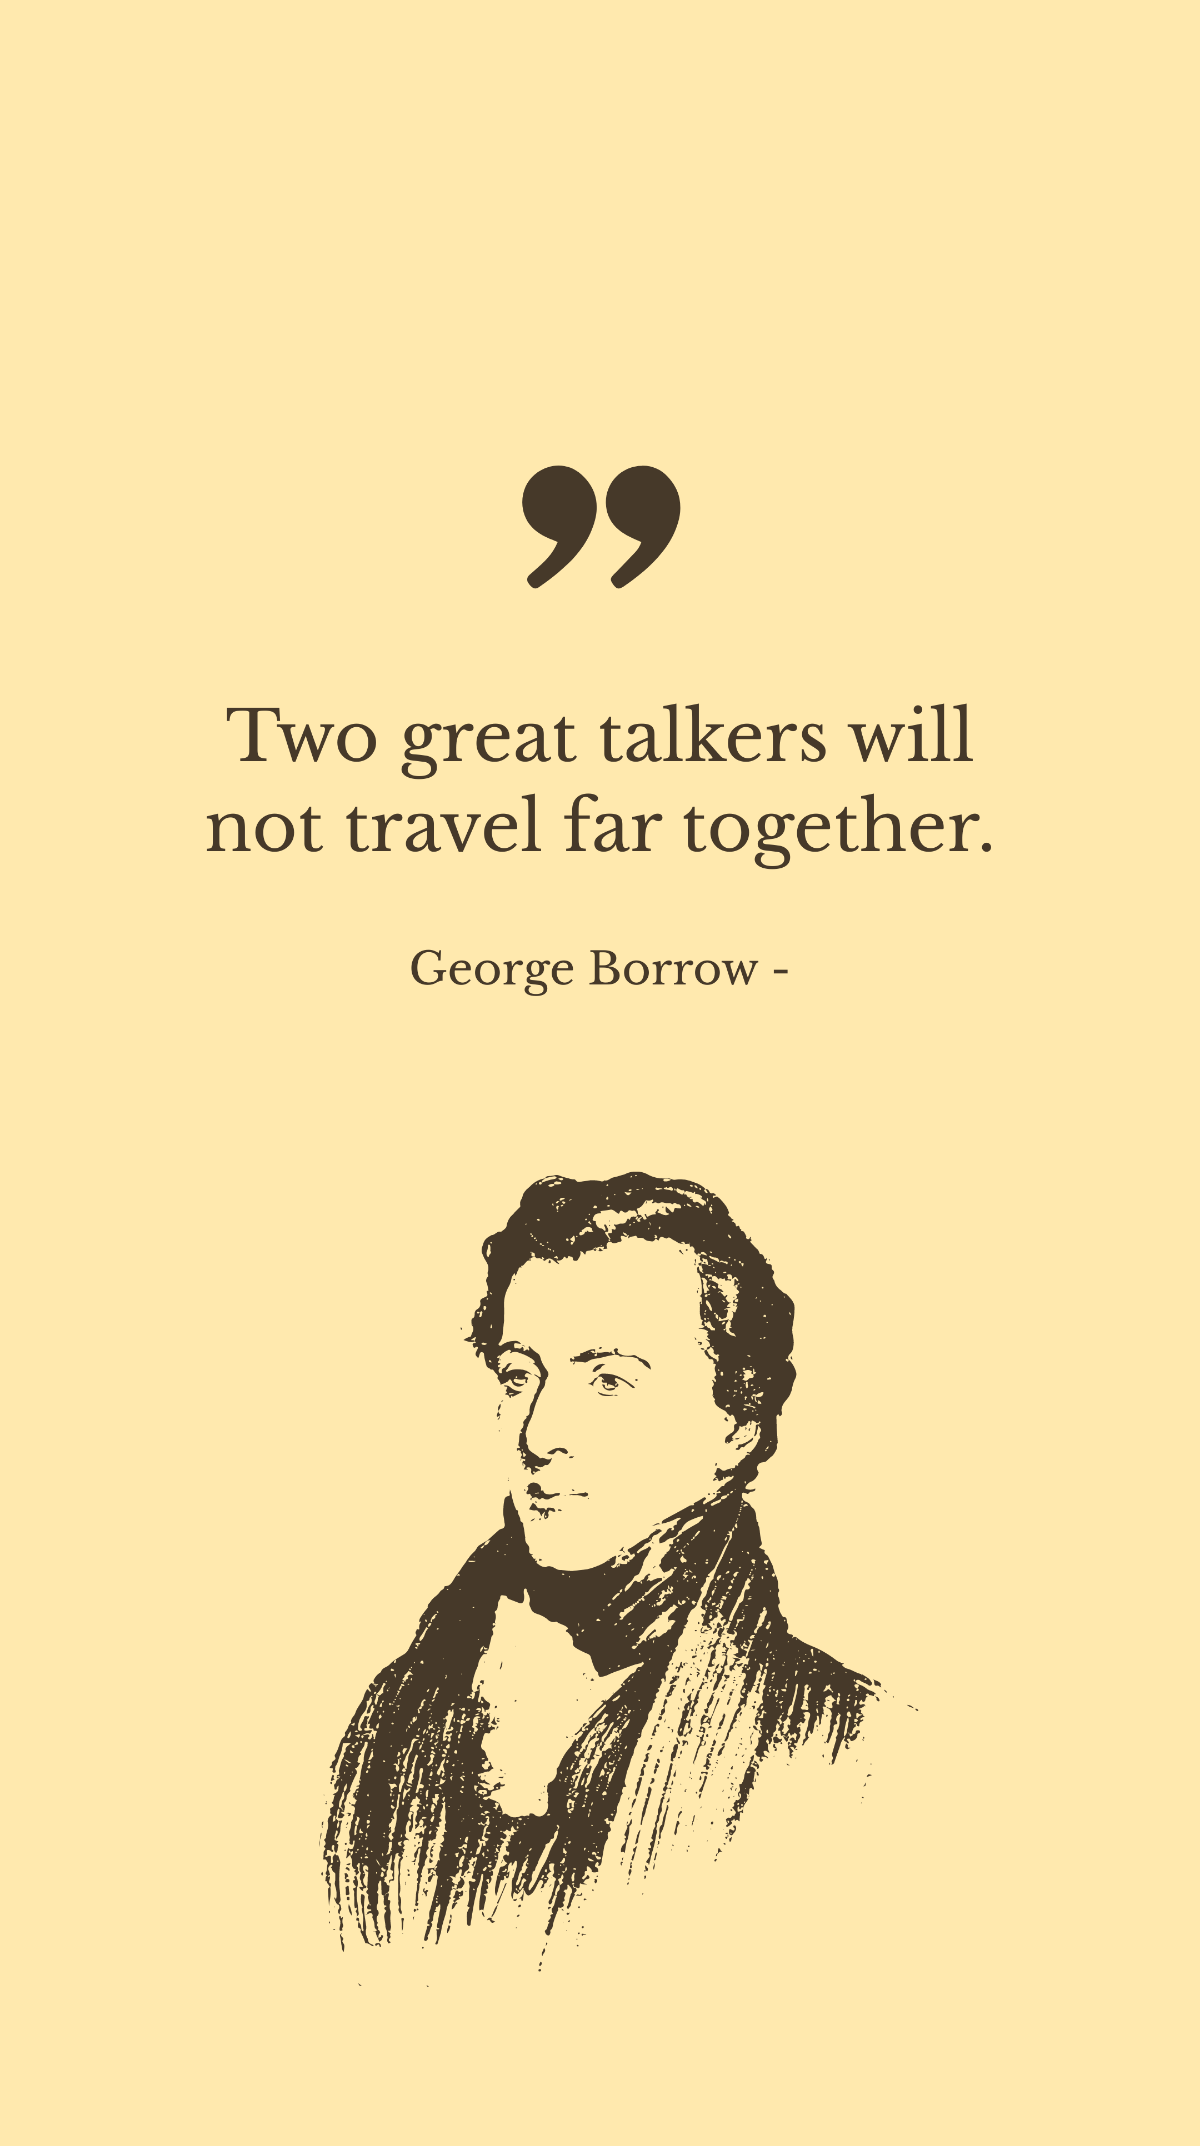 George Borrow - Two great talkers will not travel far together.